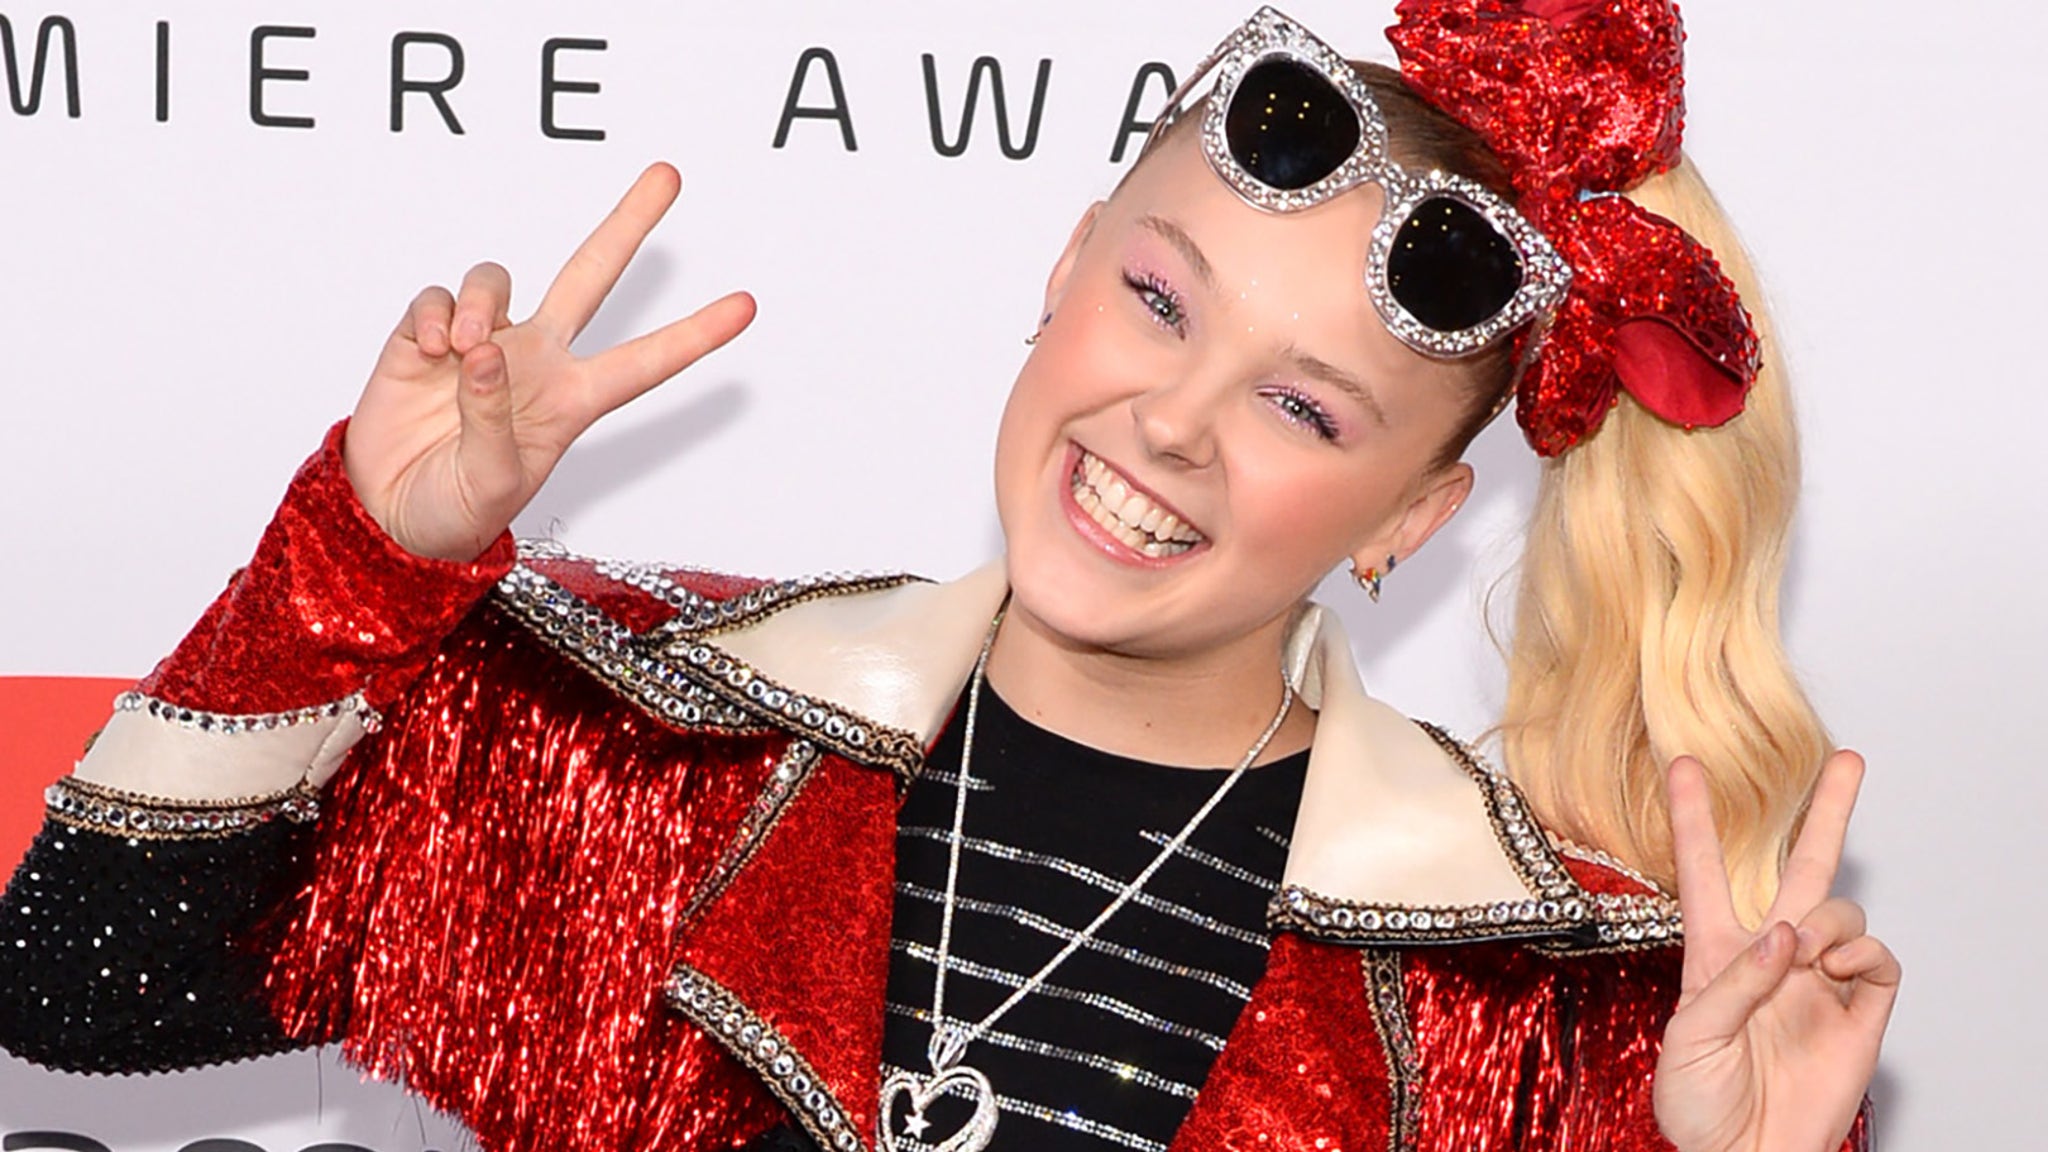 JoJo Siwa says paparazzi called the police to force her out to take pictures after leaving